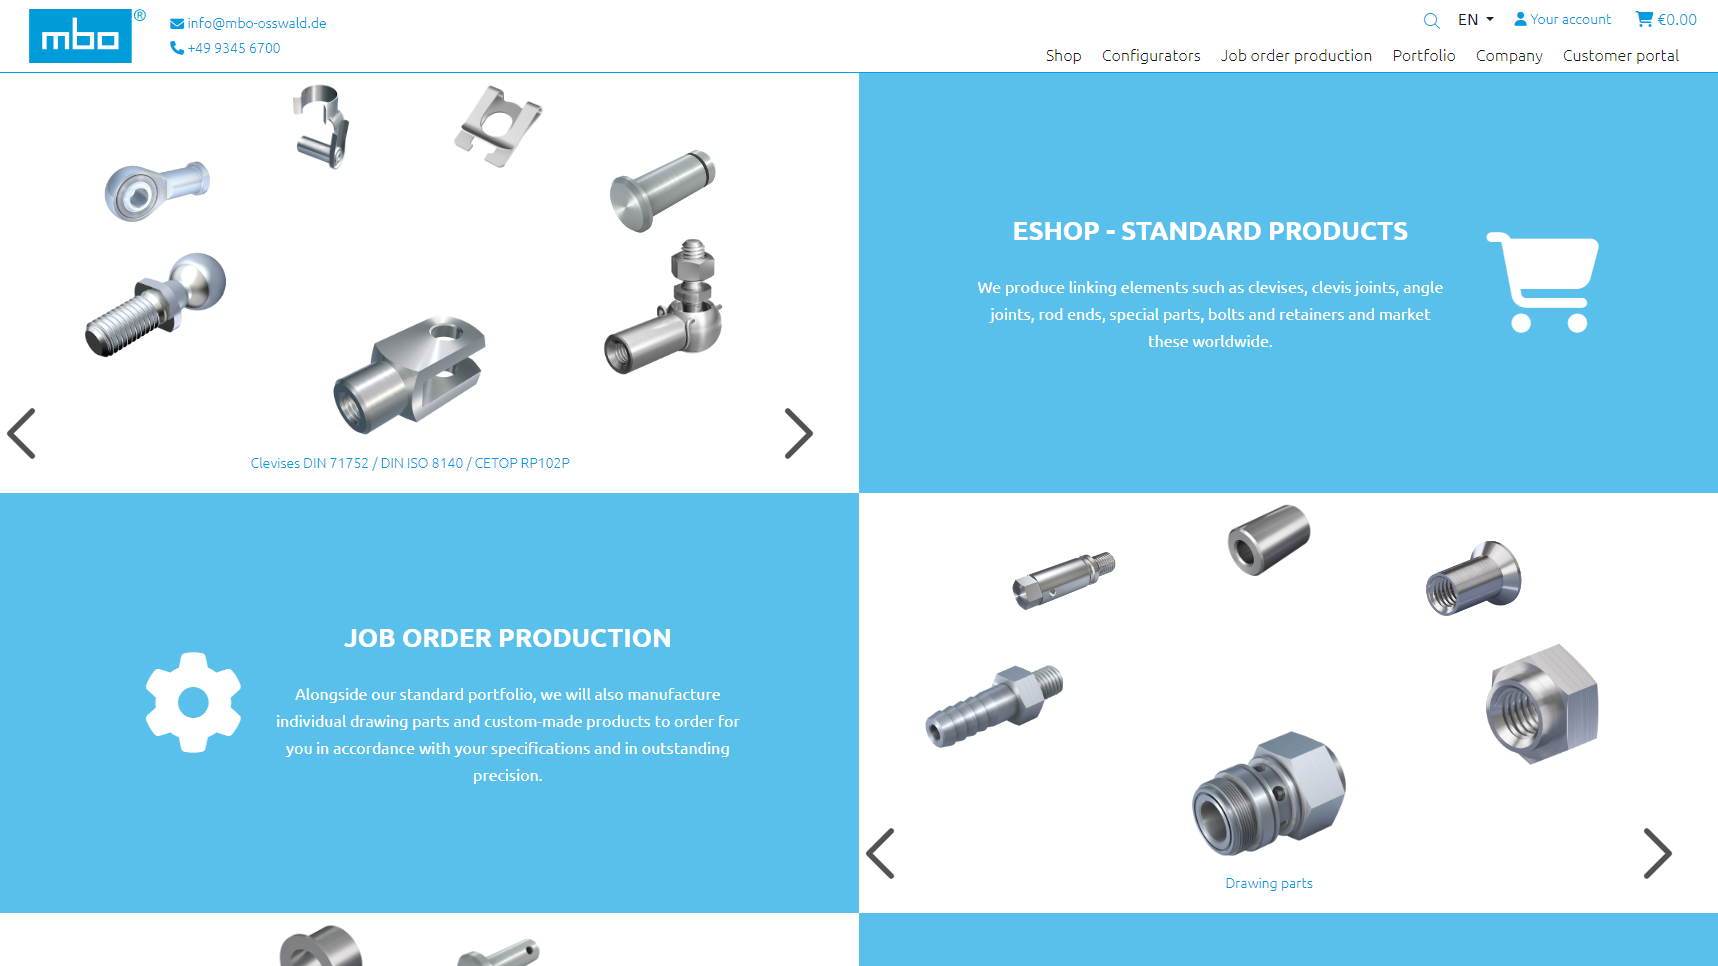 MBO Osswald - Turned Parts Manufacturer